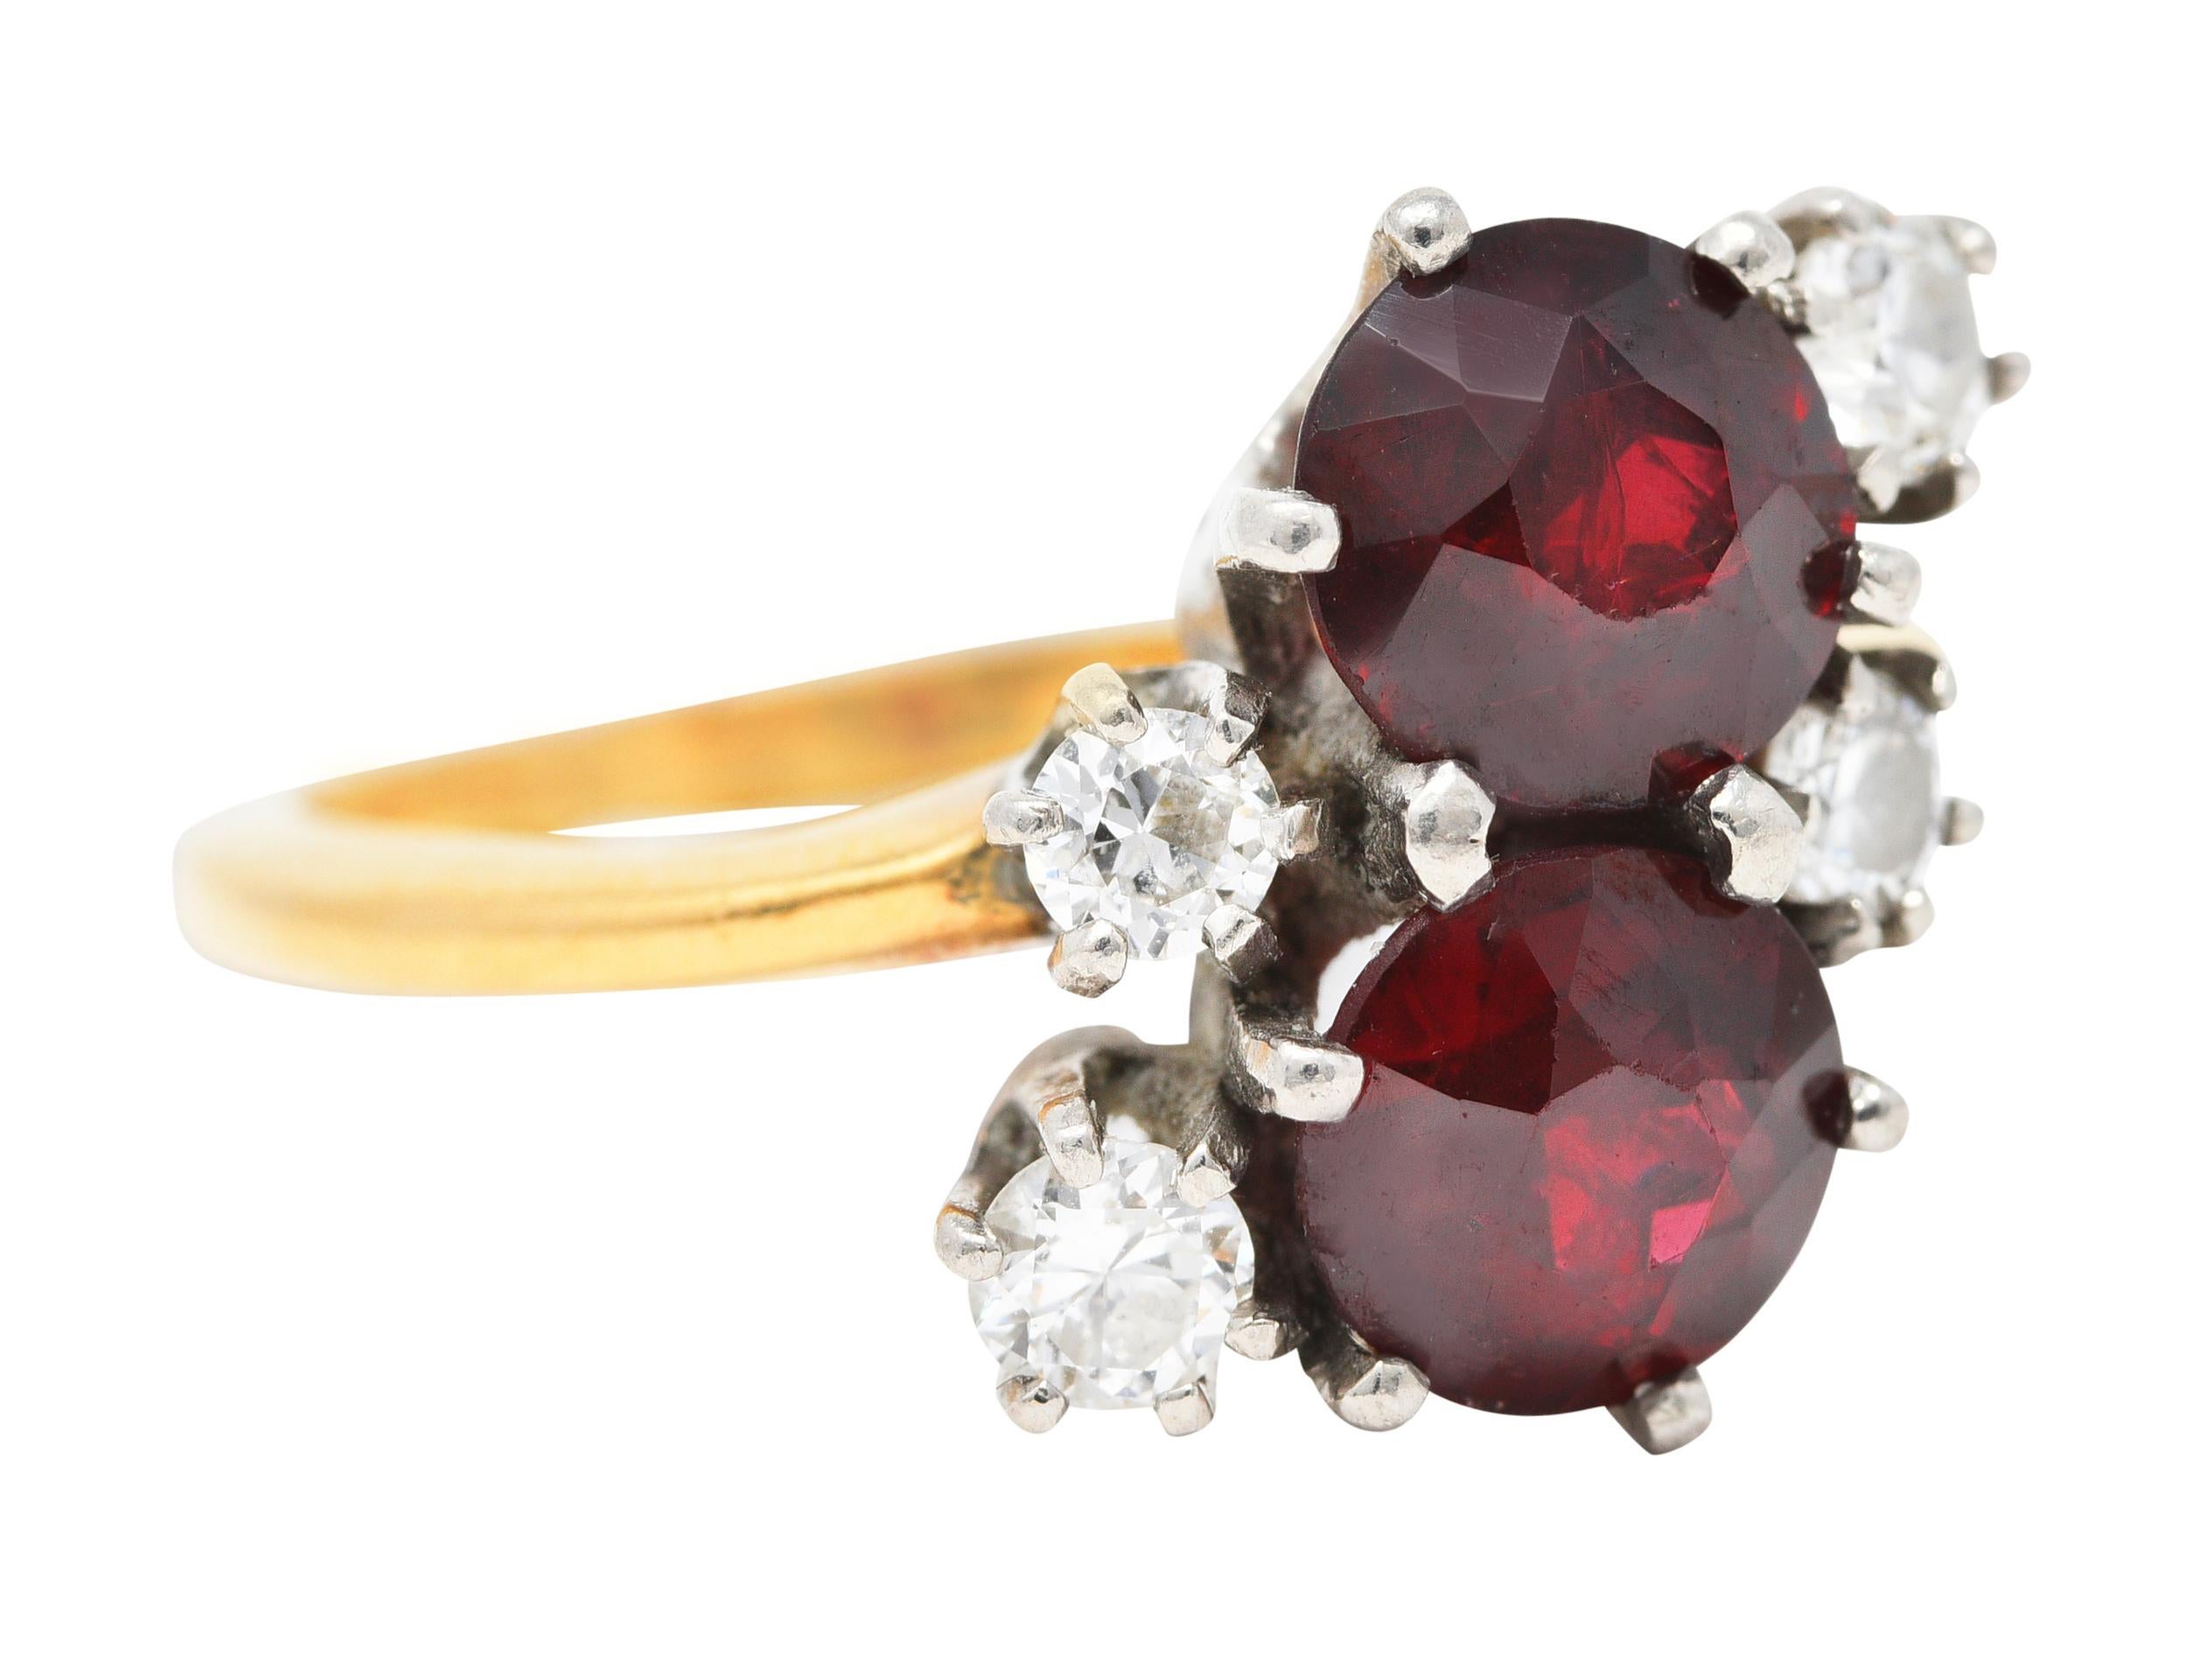 Designed as a gemstone cluster featuring two round cut garnets in the Toi et Moi style. French translated as 'You and Me'. Very well matched in rich red color while each measures approximately 6.1 mm. Accented by transitional cut diamonds weighing